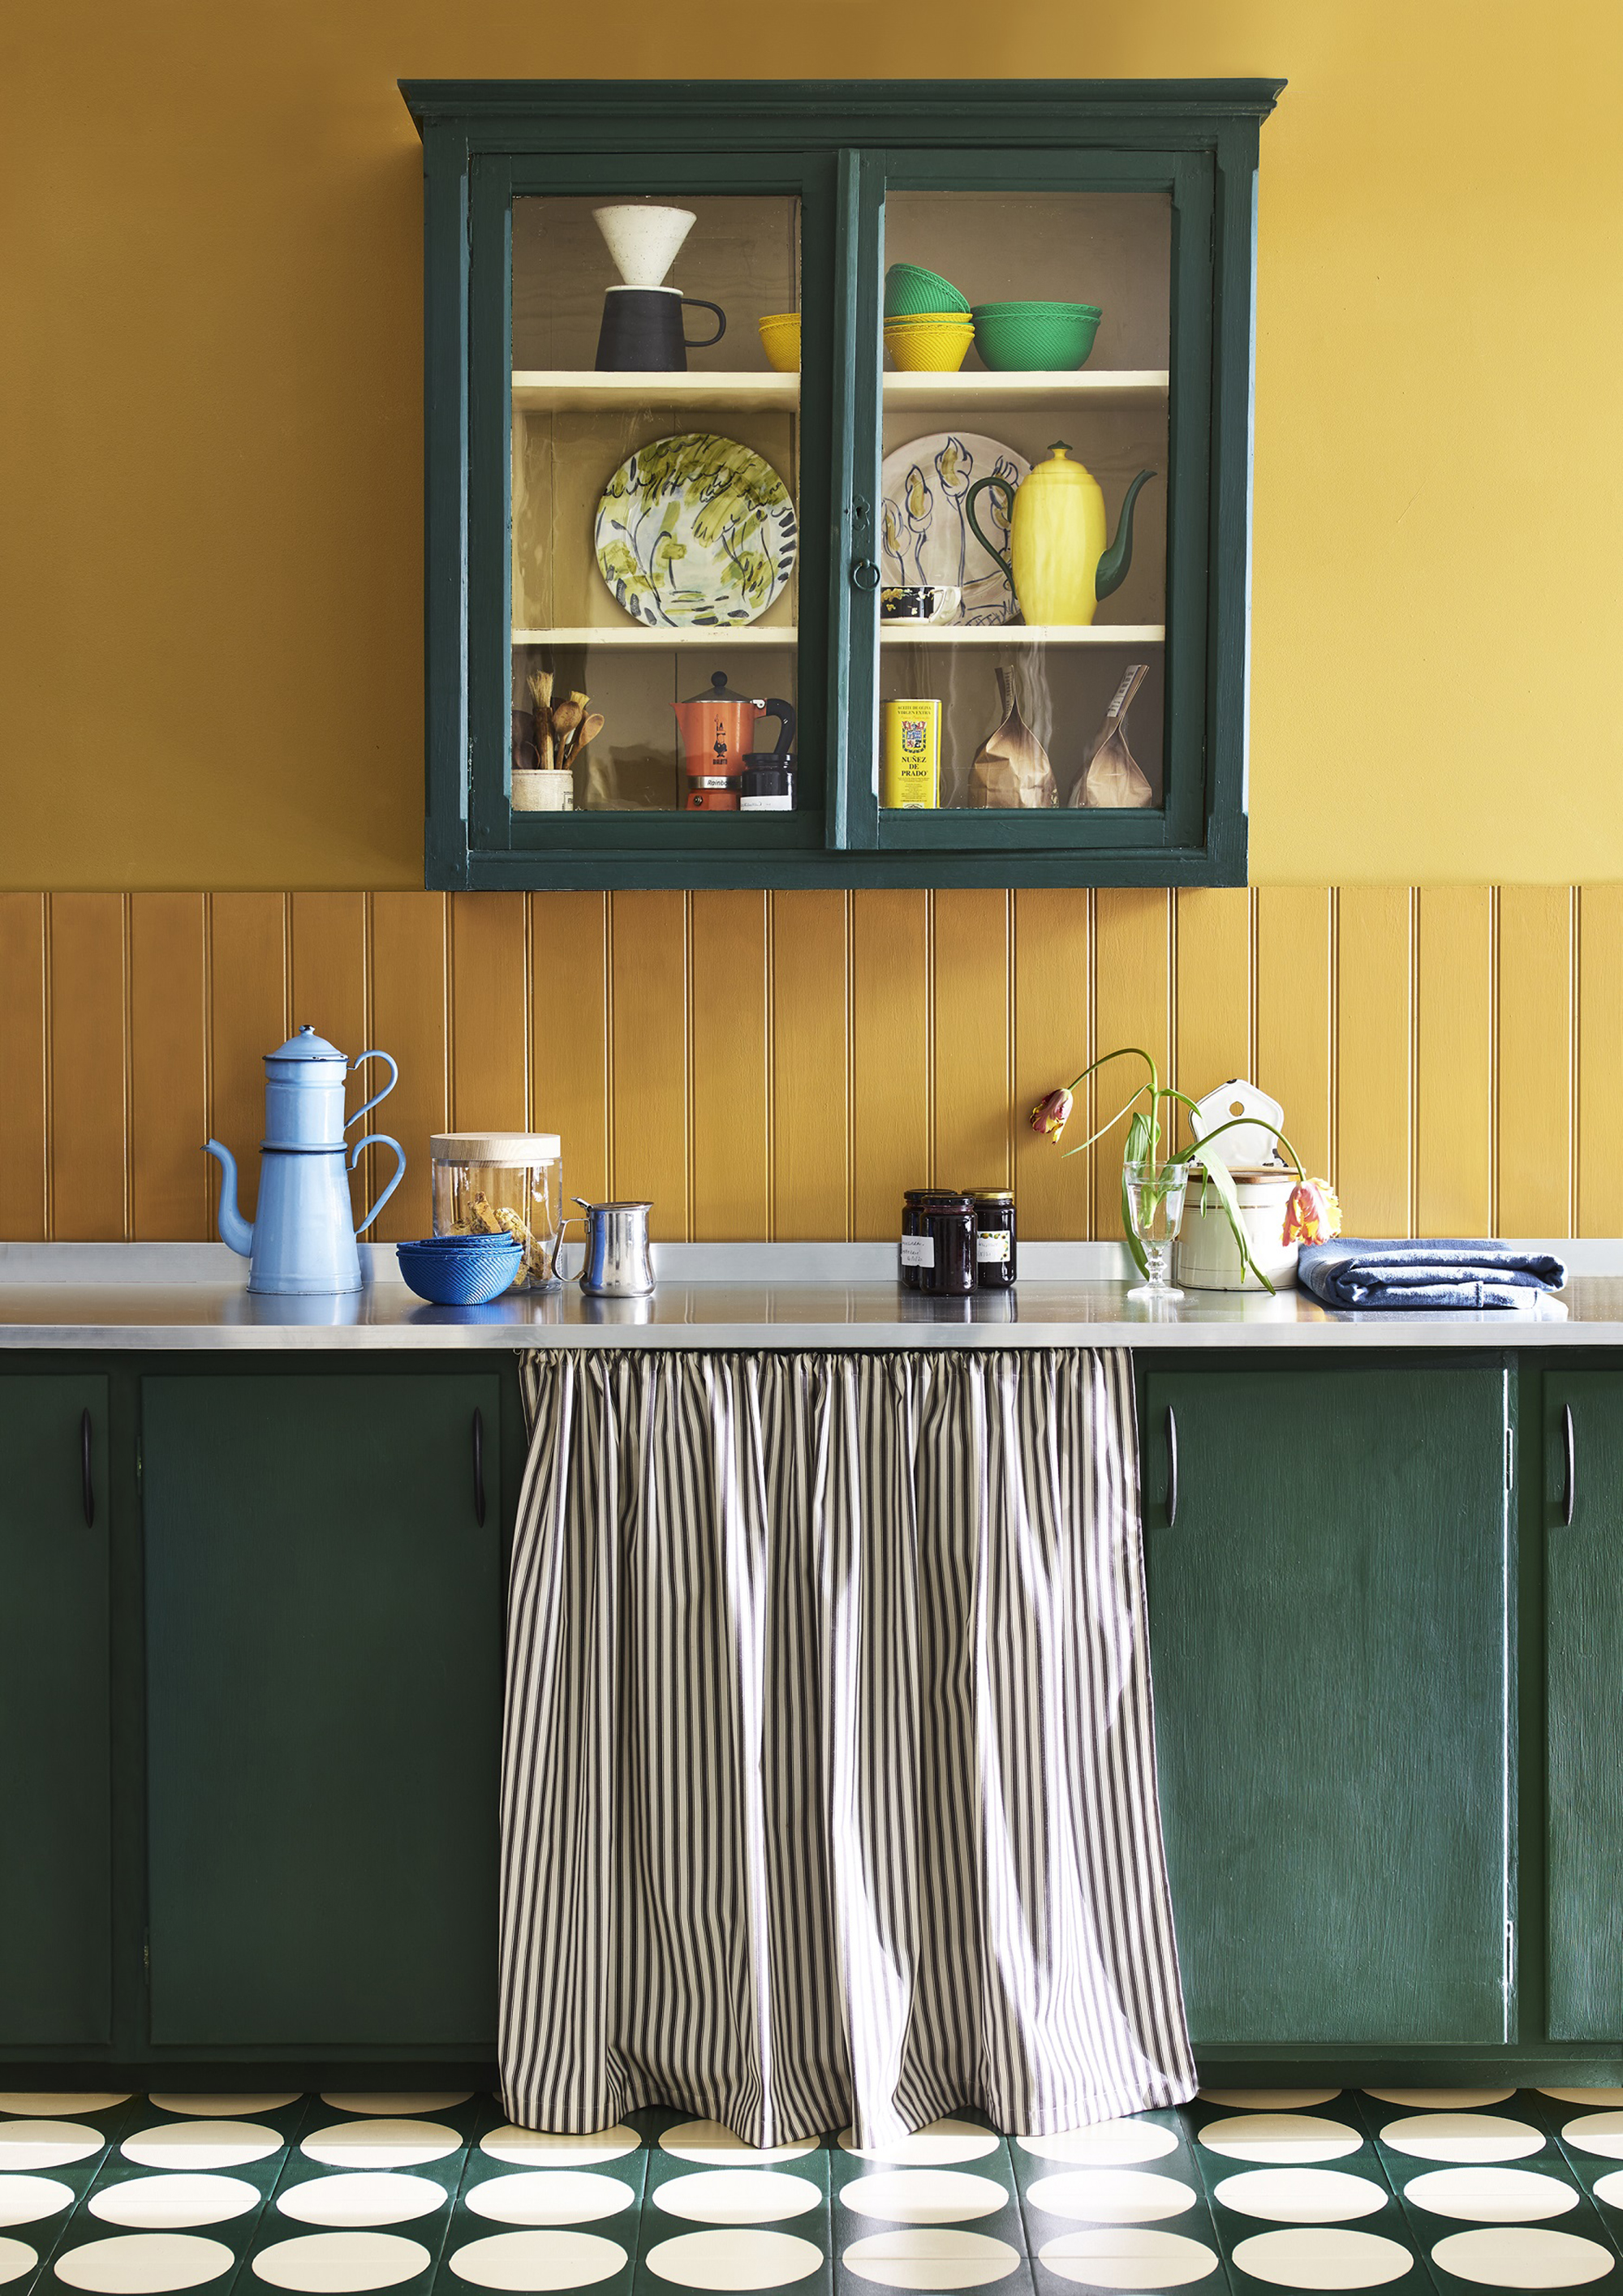 Annie Sloan yellow kitchen with green cabinets and painted tile floor